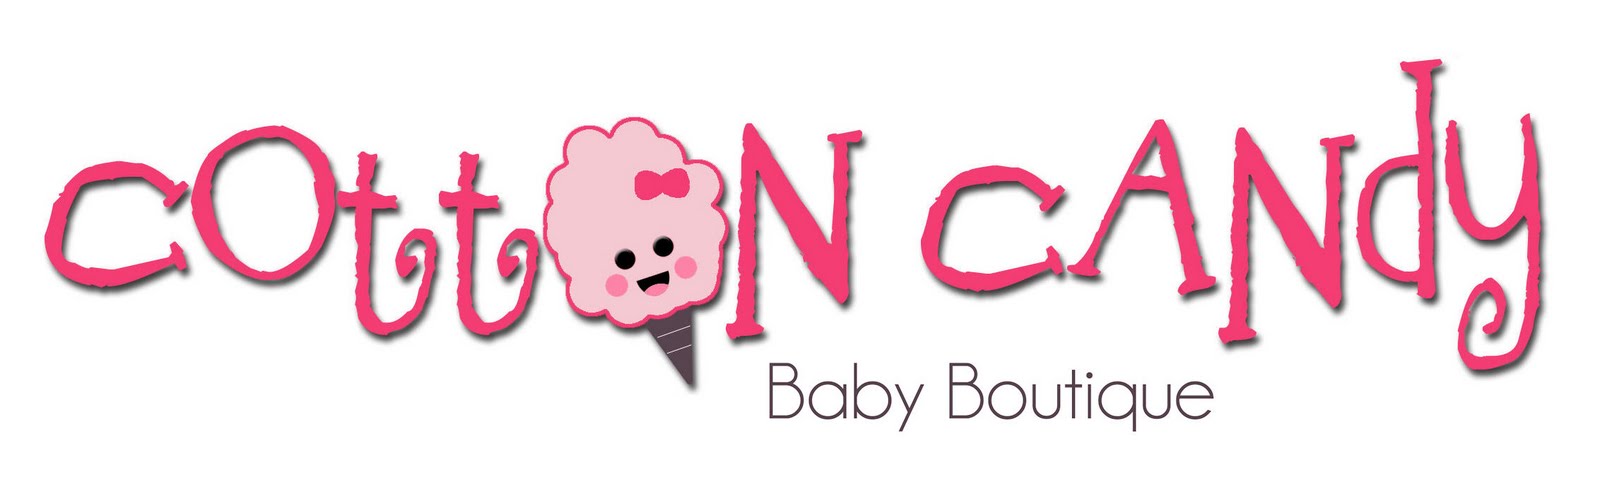 Cotton Candy Baby Boutique